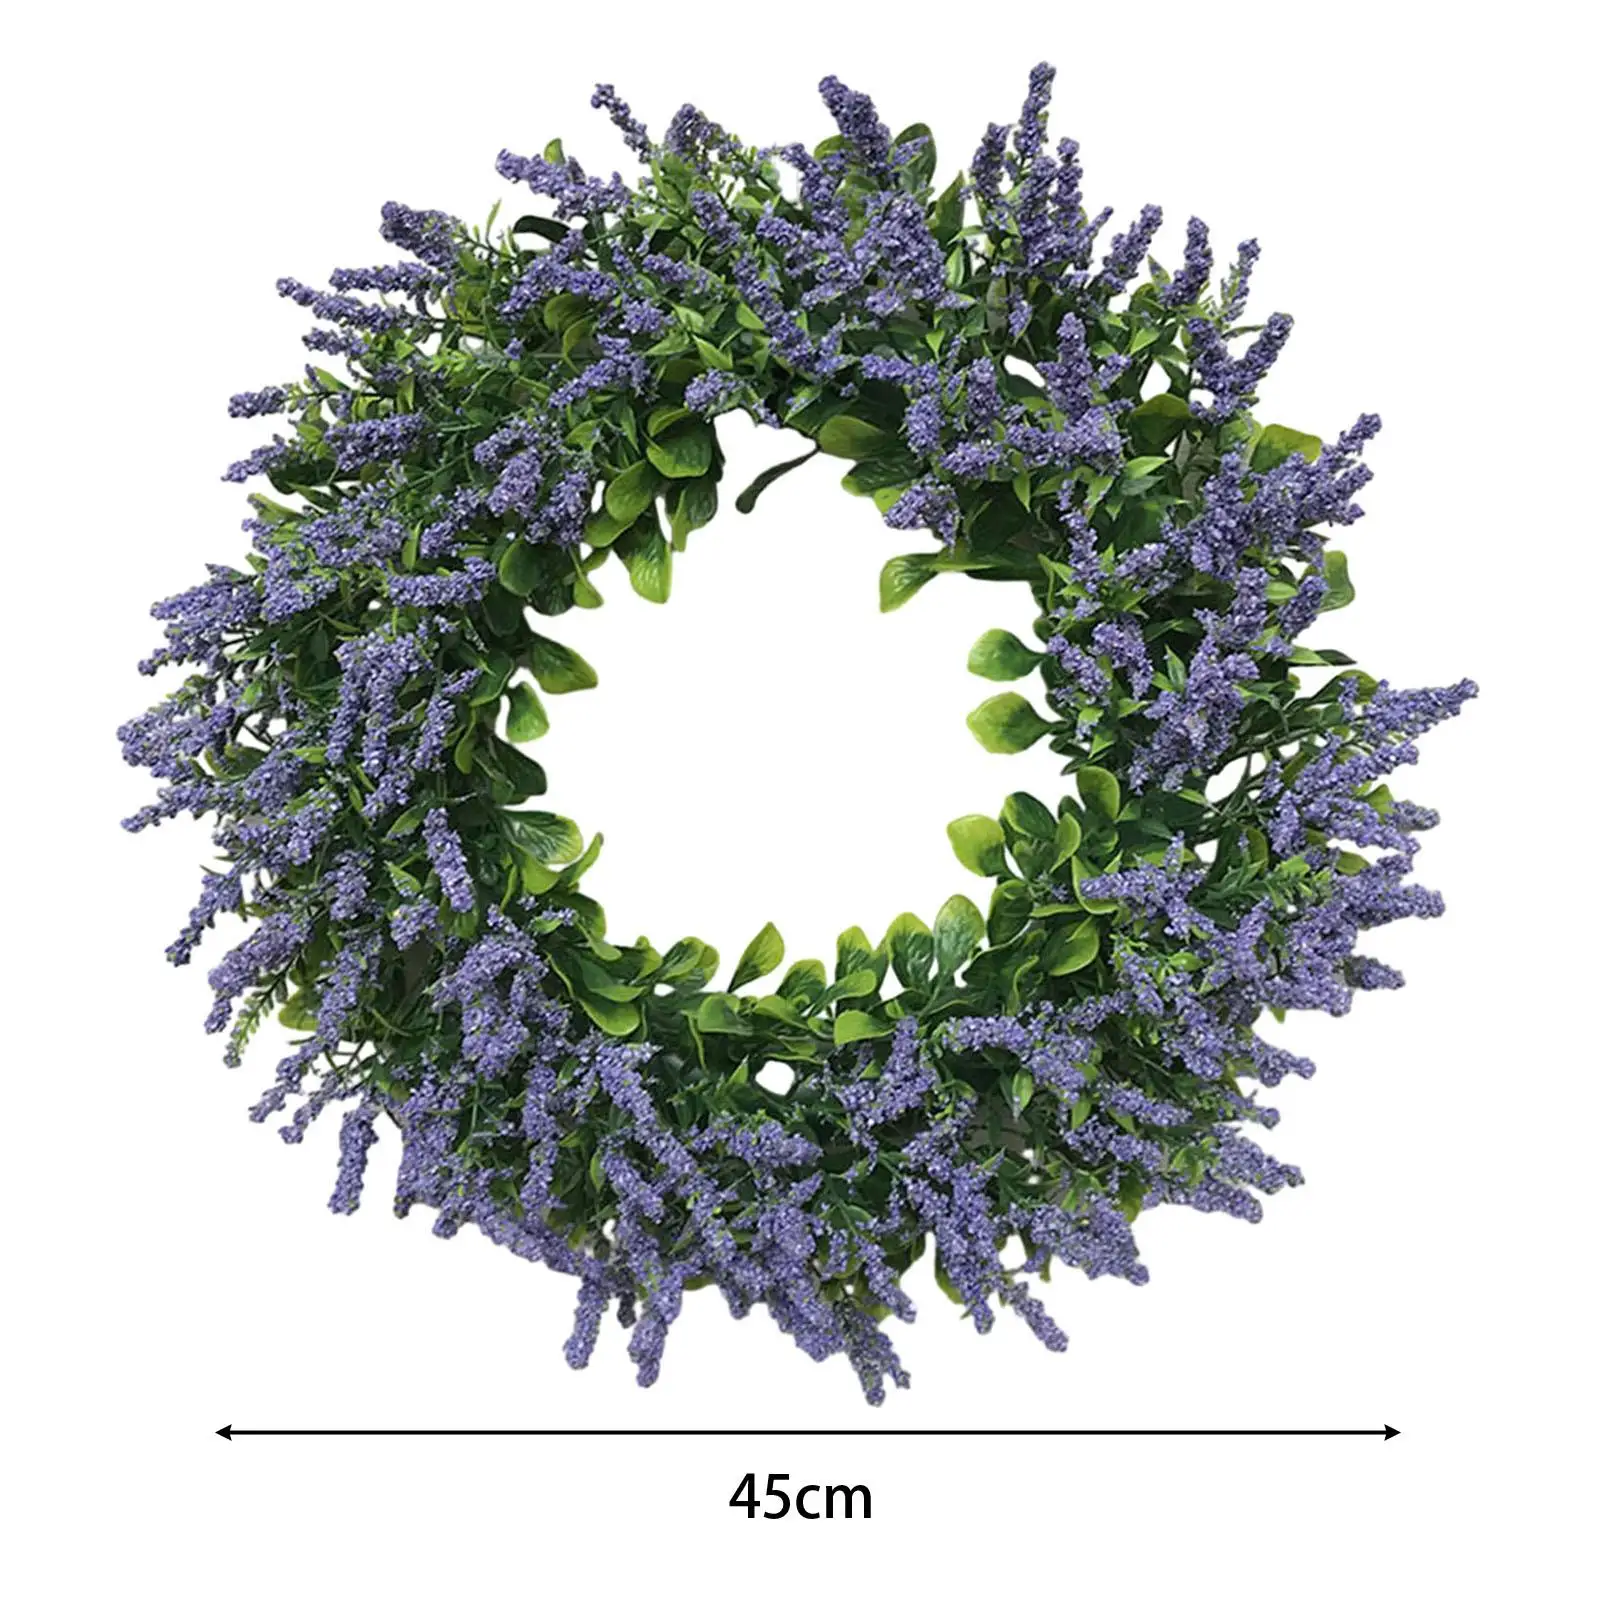 Lavender Wreath for Front Door Summer Wreaths Ornament for Home Wall Holiday